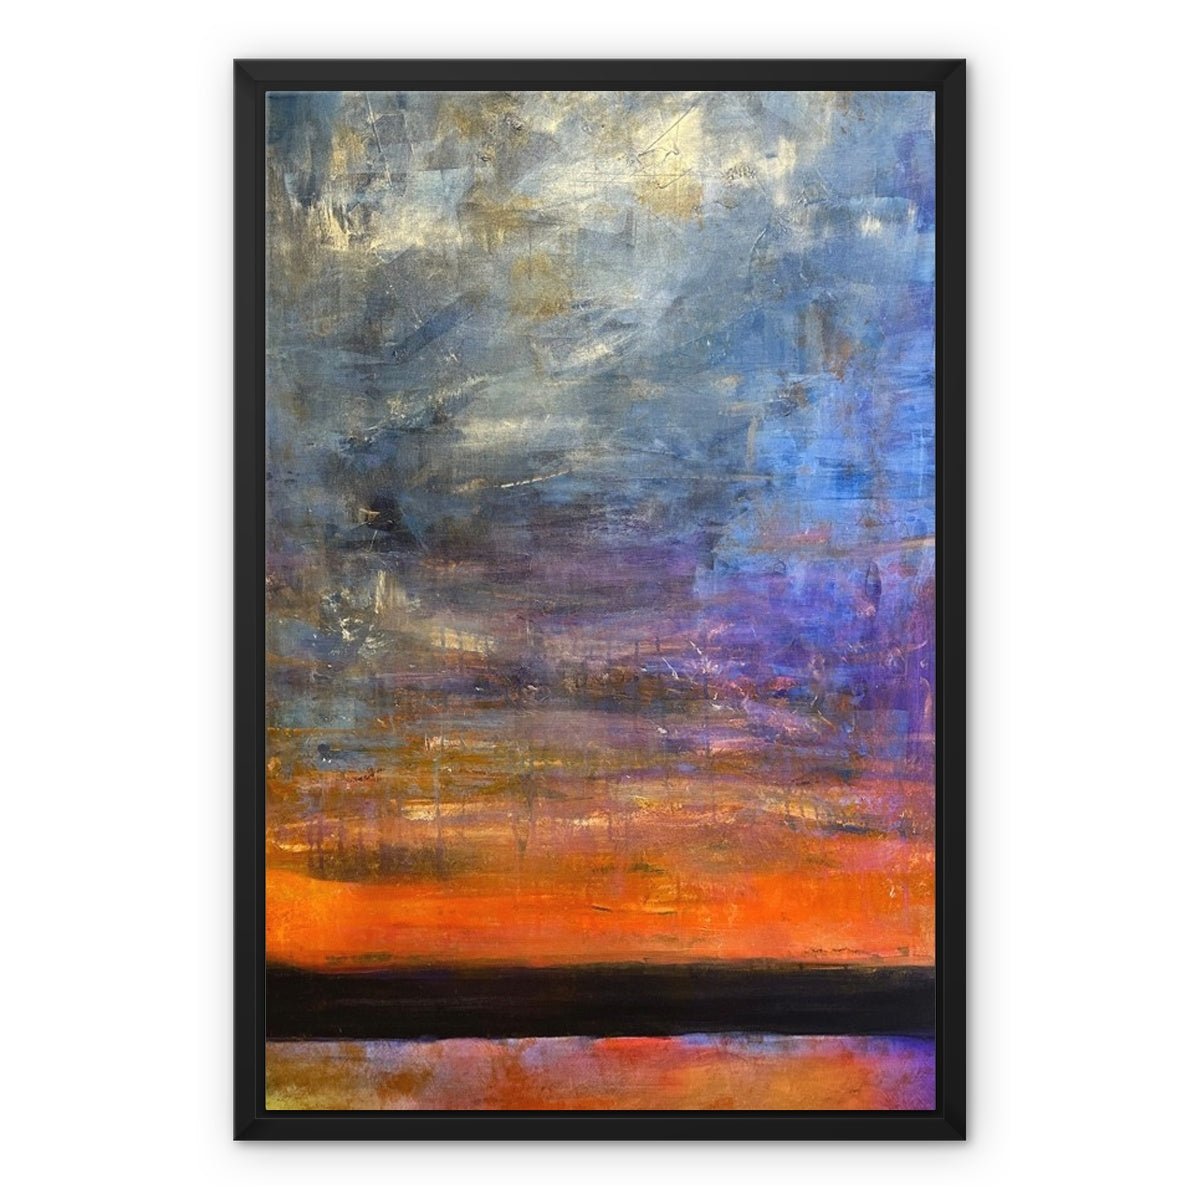 Horizon Dreams Abstract Painting | Framed Canvas From Scotland-Floating Framed Canvas Prints-Abstract & Impressionistic Art Gallery-18"x24"-Paintings, Prints, Homeware, Art Gifts From Scotland By Scottish Artist Kevin Hunter